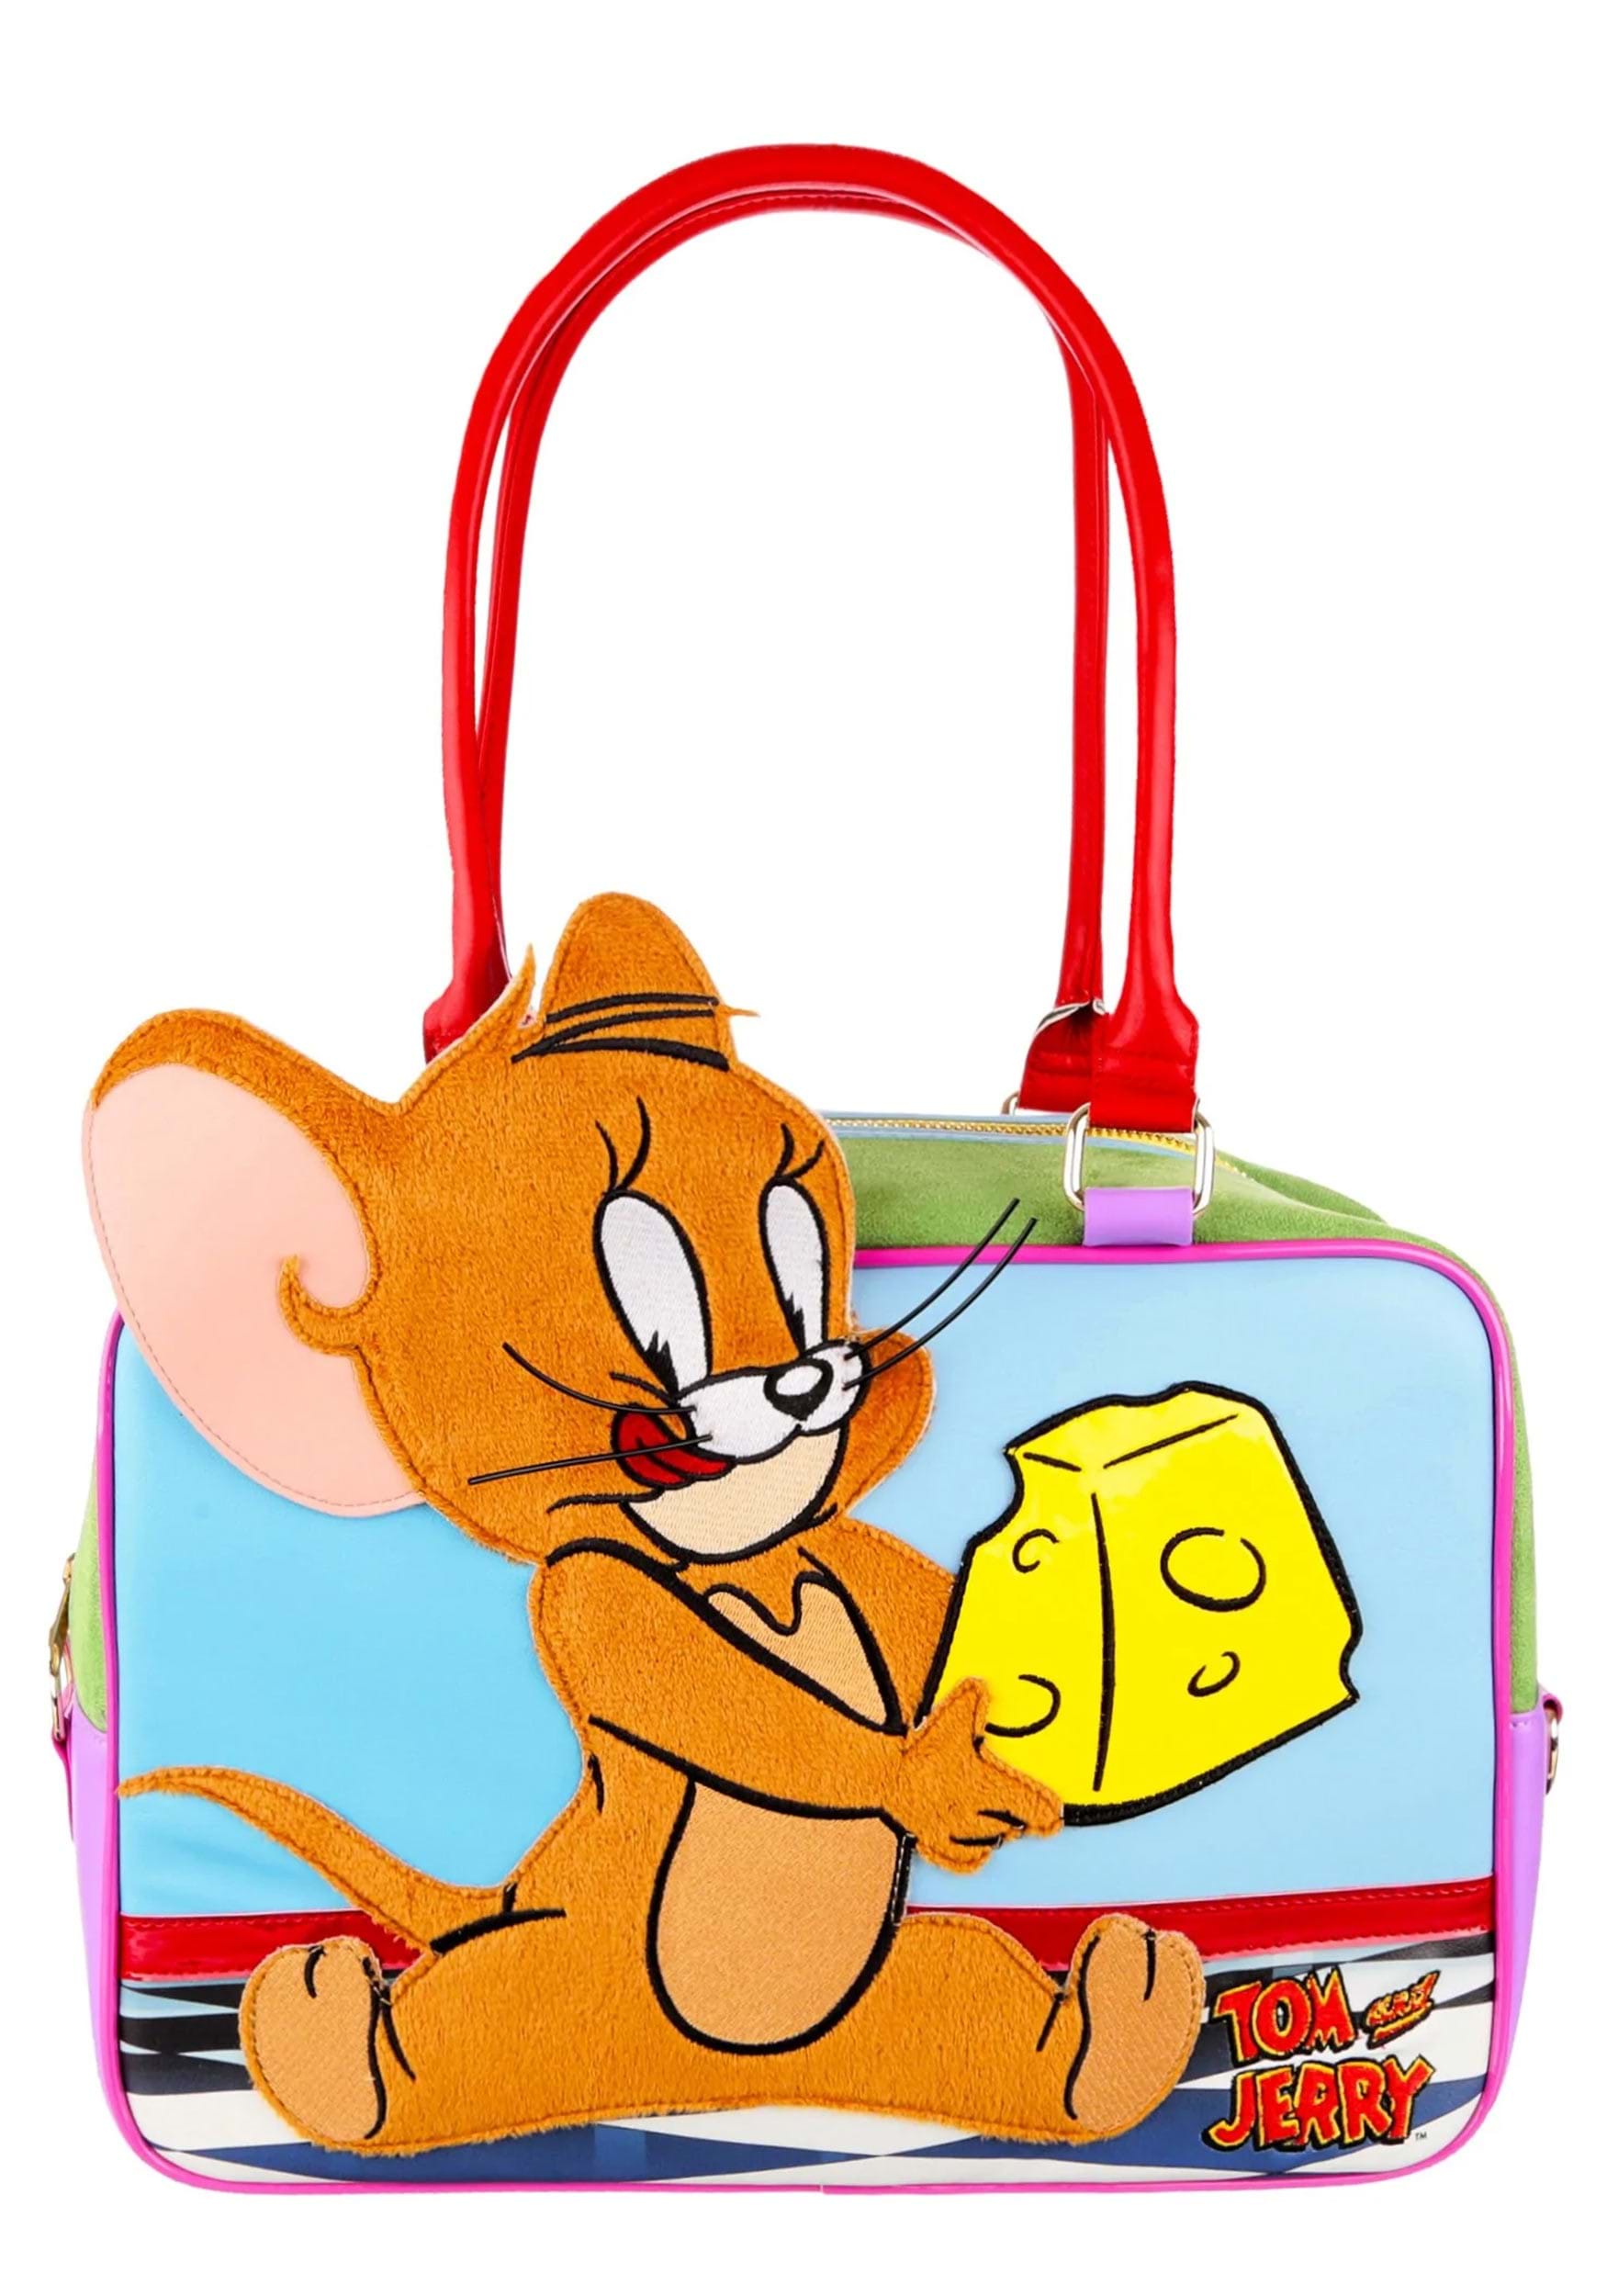 Buy Tom Jerry Vintage Online In India - Etsy India